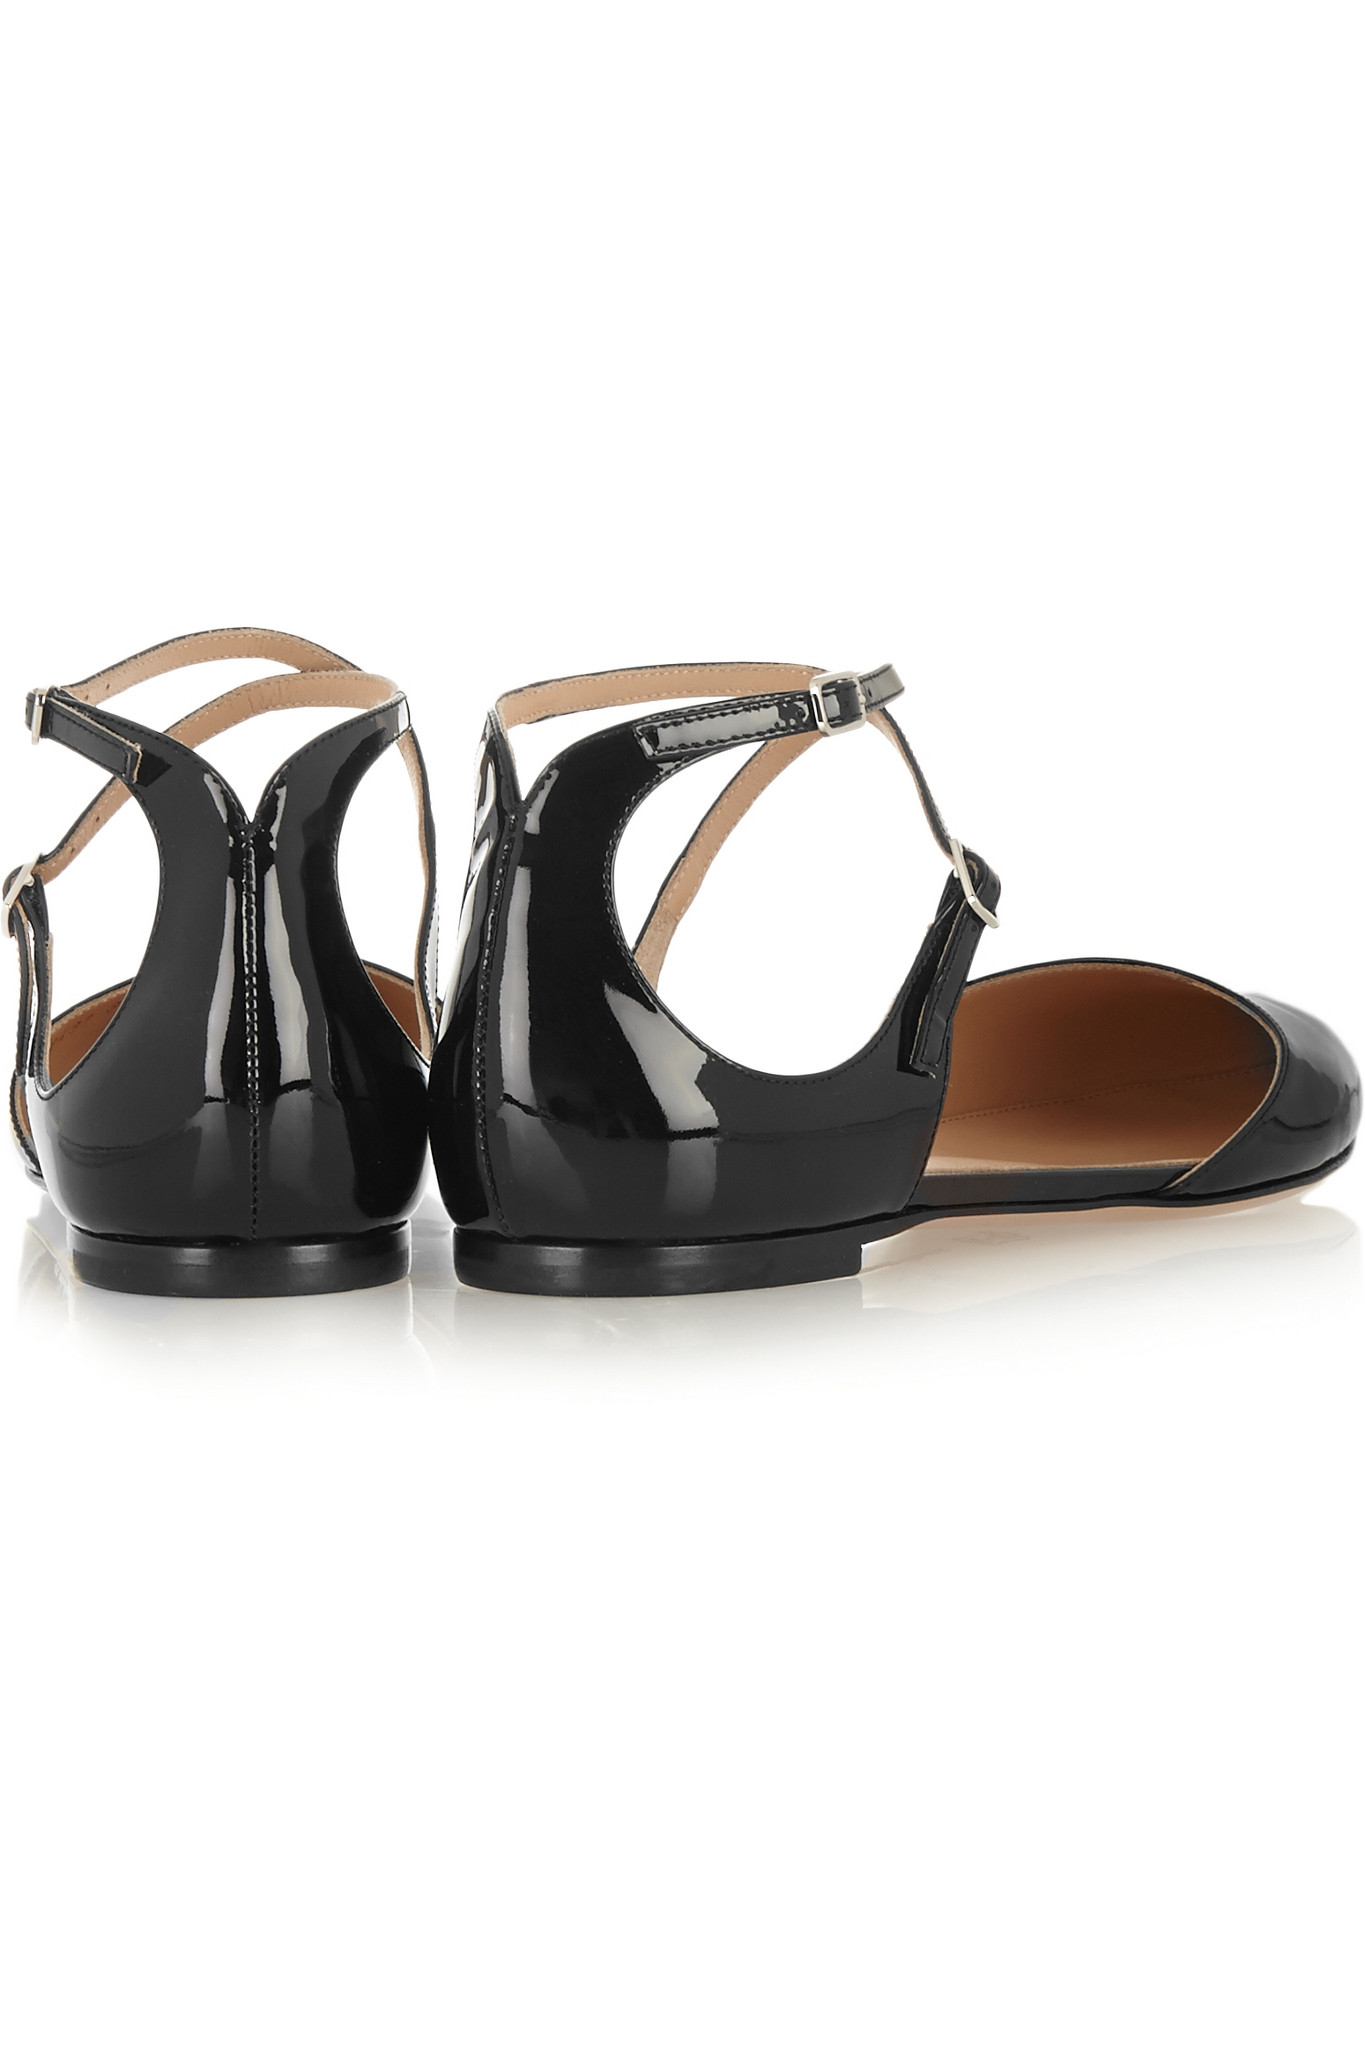 Gianvito Rossi Pointed-Toe Patent-Leather Flats in Black - Lyst